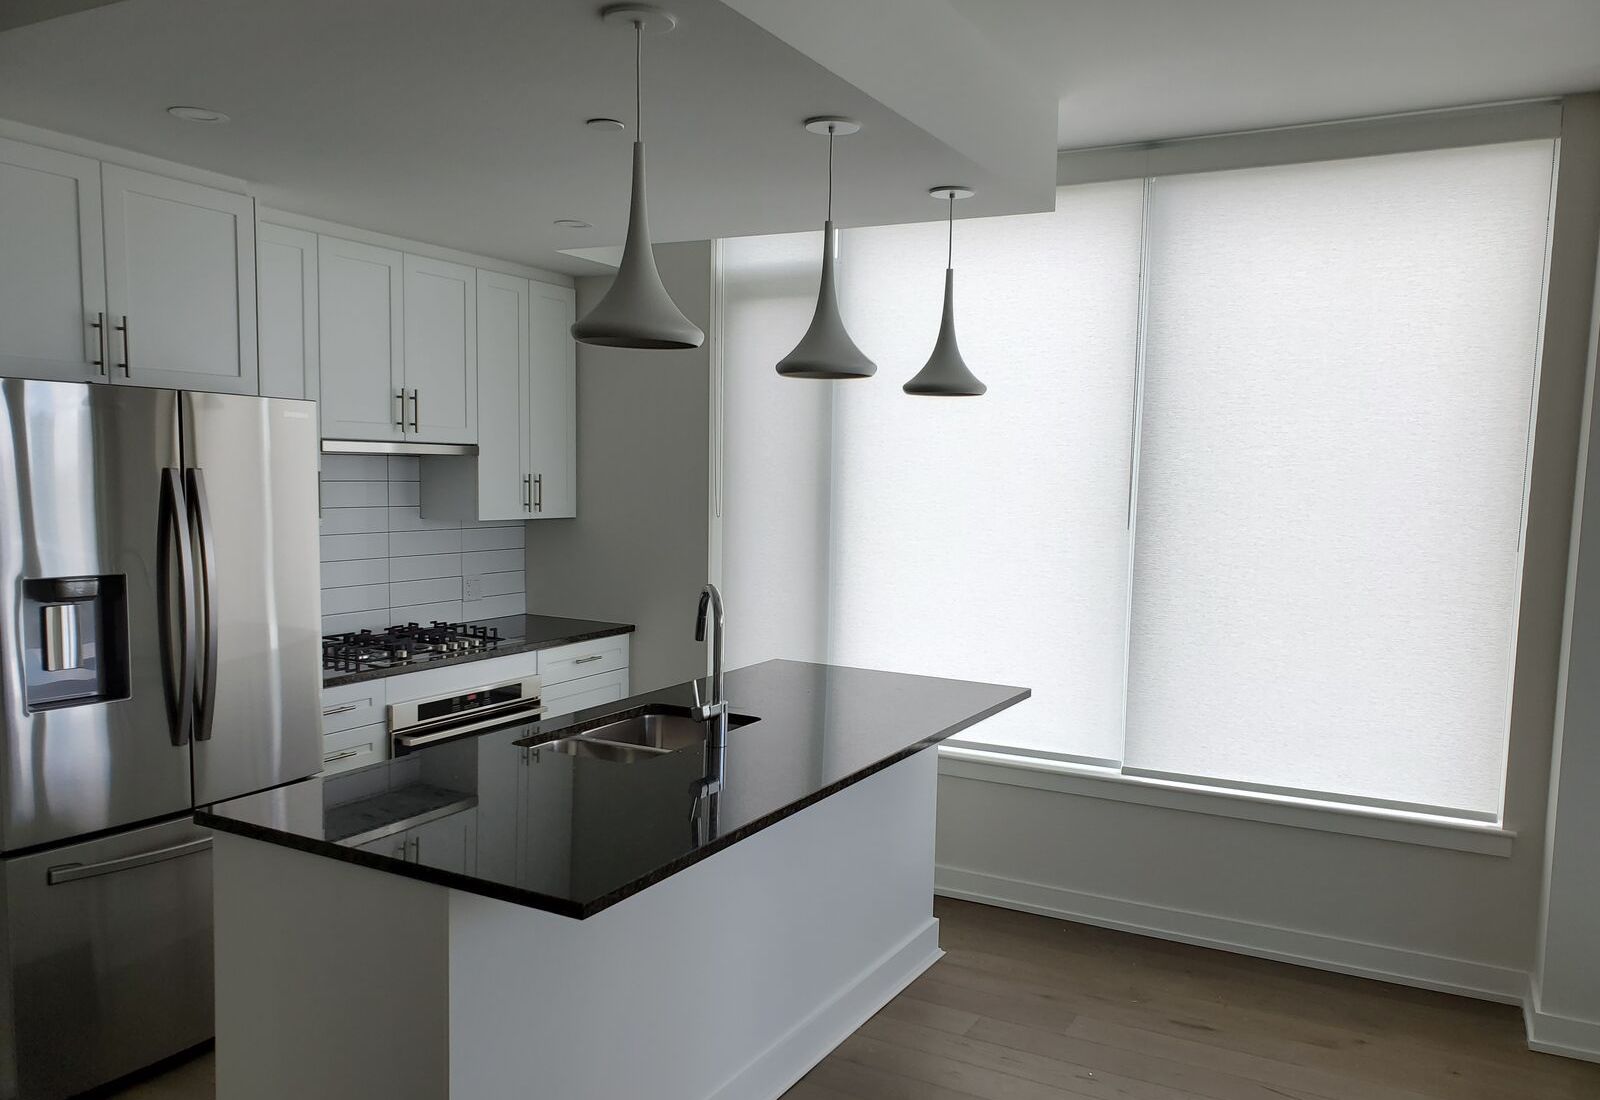 White solar shades with %1 openness cover large kitchen windows, providing complete privacy.